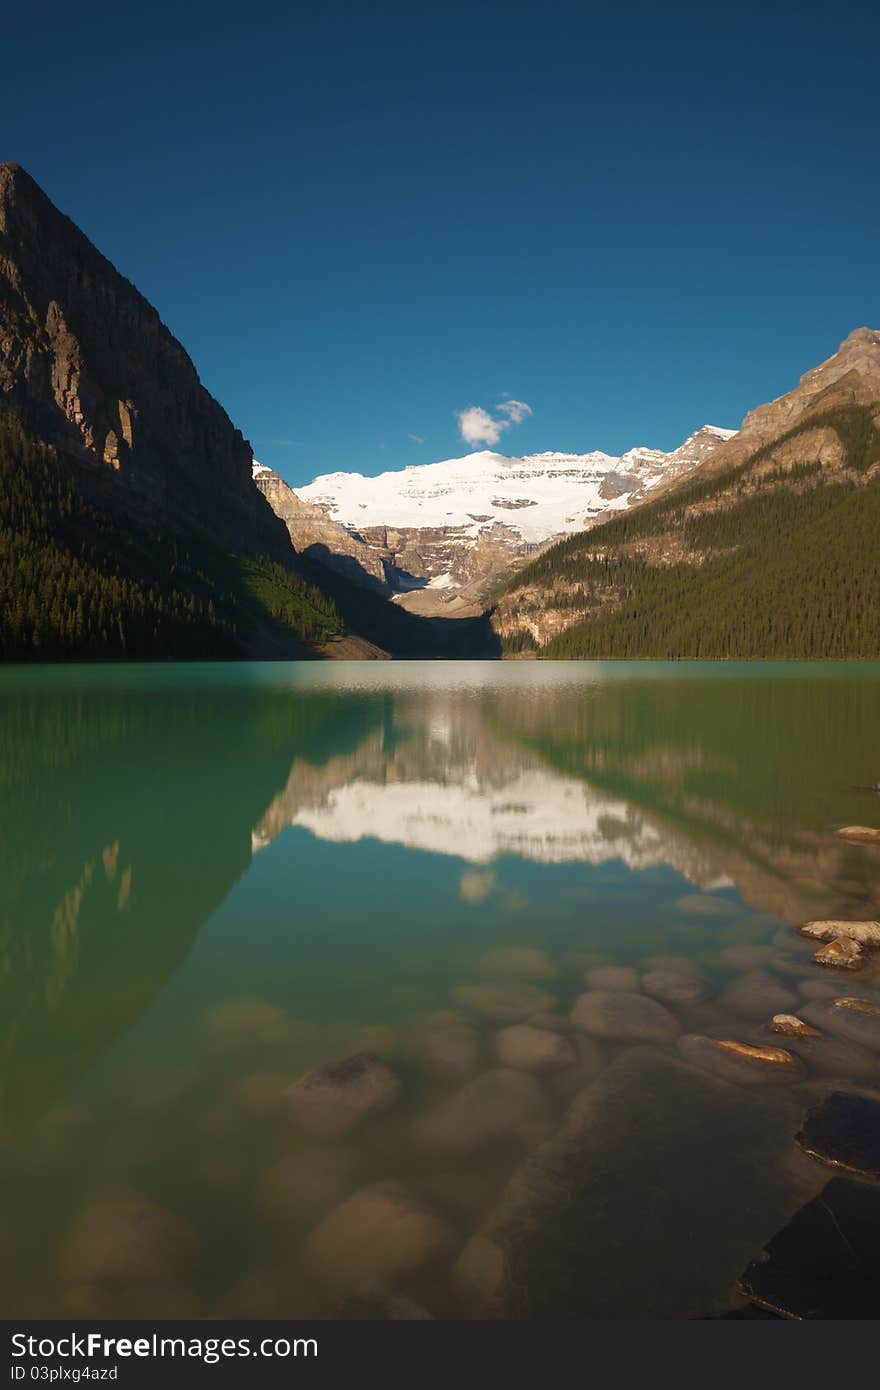 Morning on the Lake Louise, Banff (Alberta, Canada), in Rocky Mountains. This is a long exposure (up to 30 seconds) photograph, to add dreamy appearance to the reflections in the lake. To capture the whole dynamic range of the scene, the high dynamic range (HDR) technique was used. (No tonal mapping was applied - so the colors are all real.)